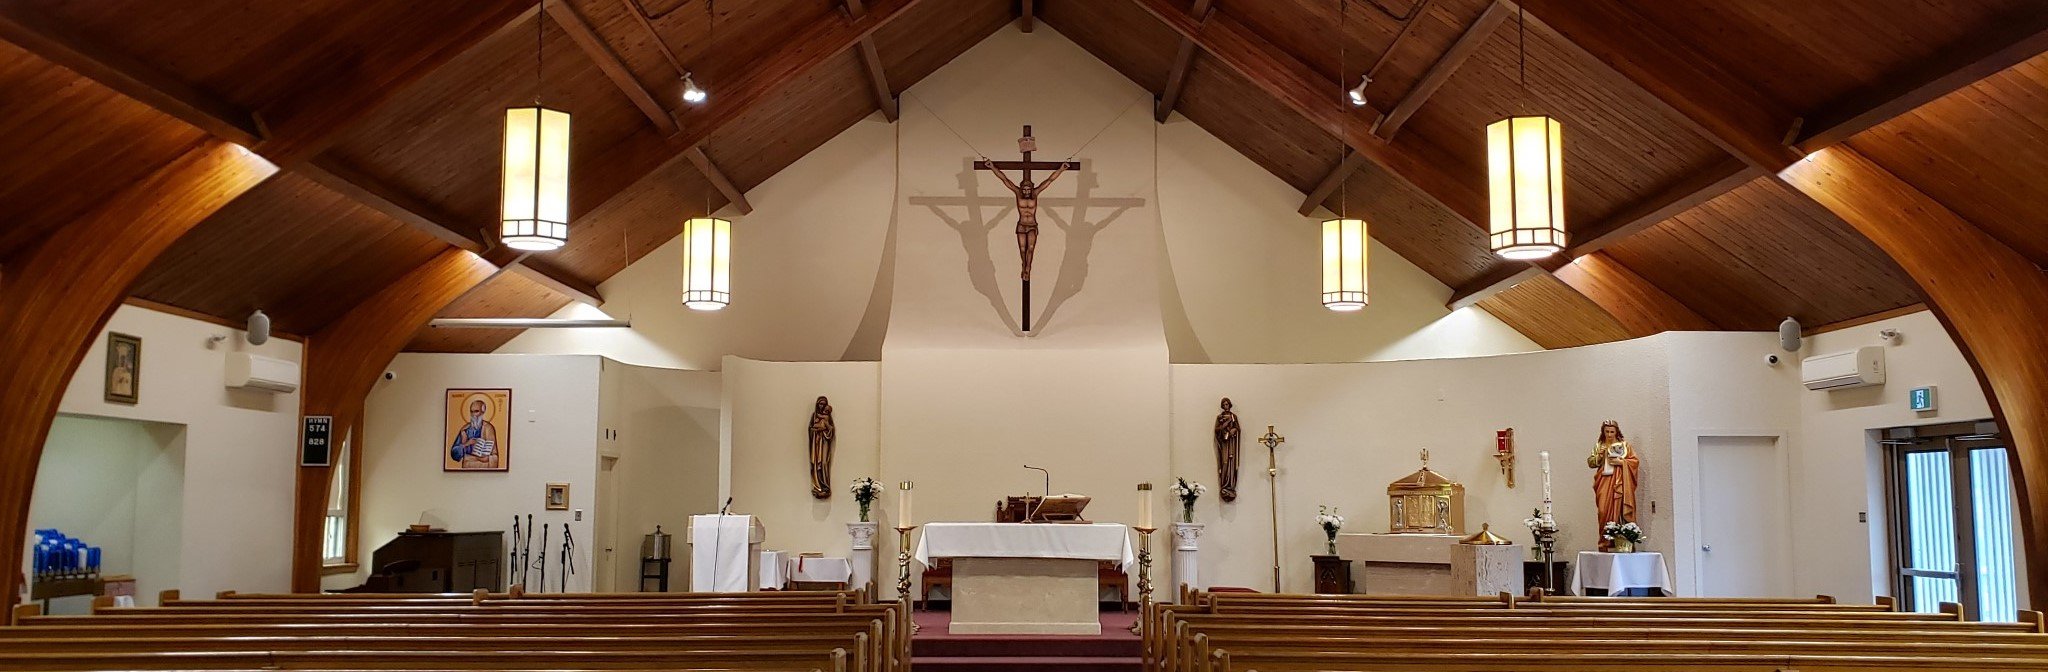 An inside view of the Sanctuary of St. John the Evangelist Parish, Weston.  Wide panoramic view from the candleside to the side doors of sanctuary.